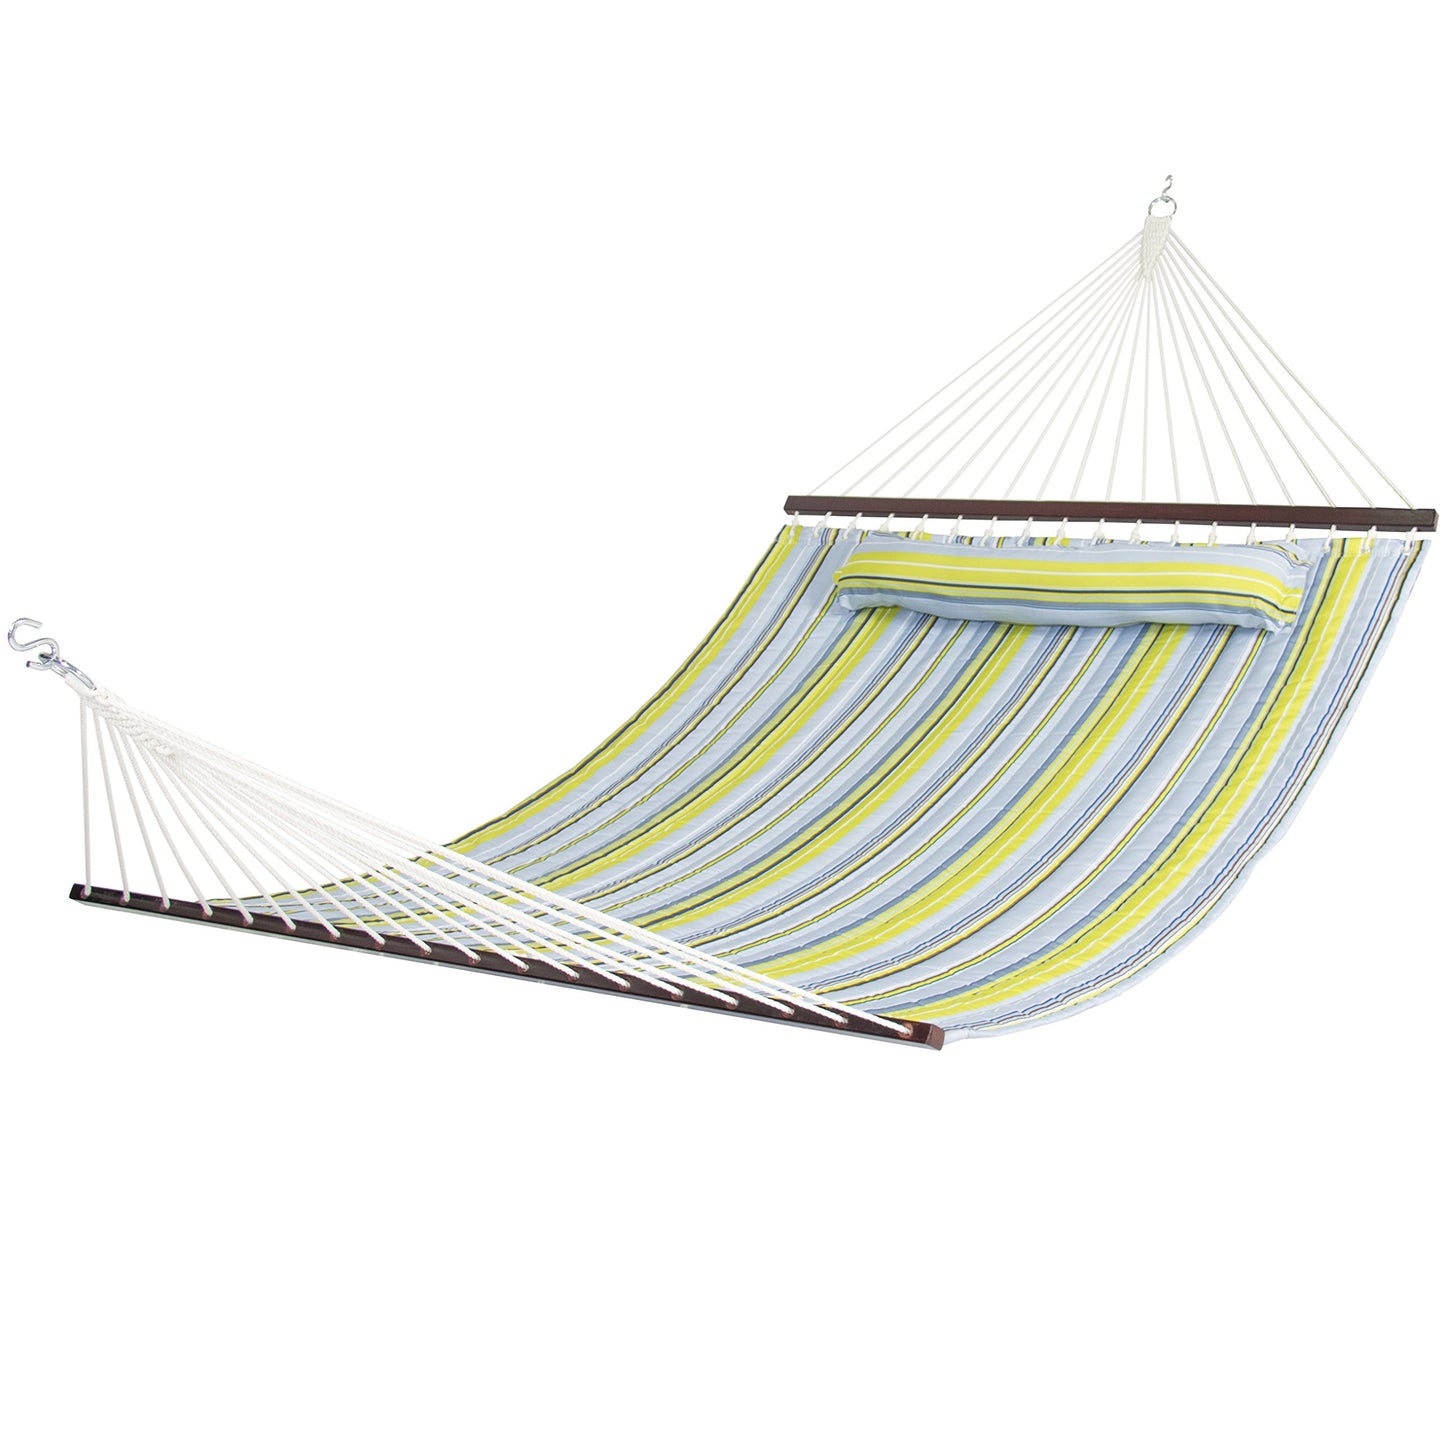 Quilted Hammock Pillow,Spreader Bar - Best Choice Products